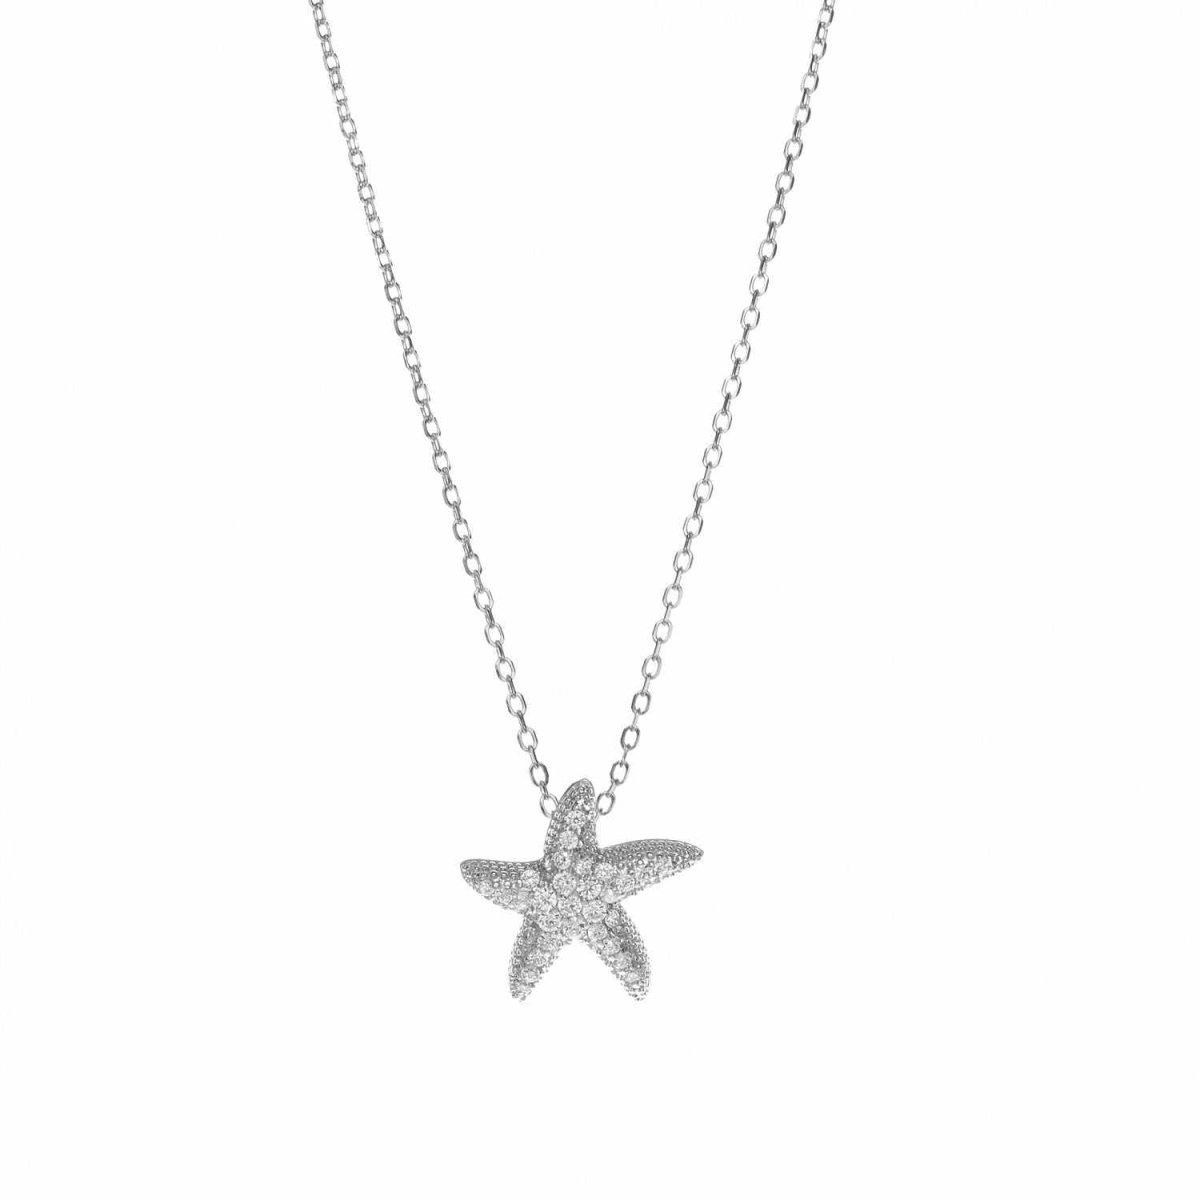 Necklace - Shiny silver pendant with starfish motif